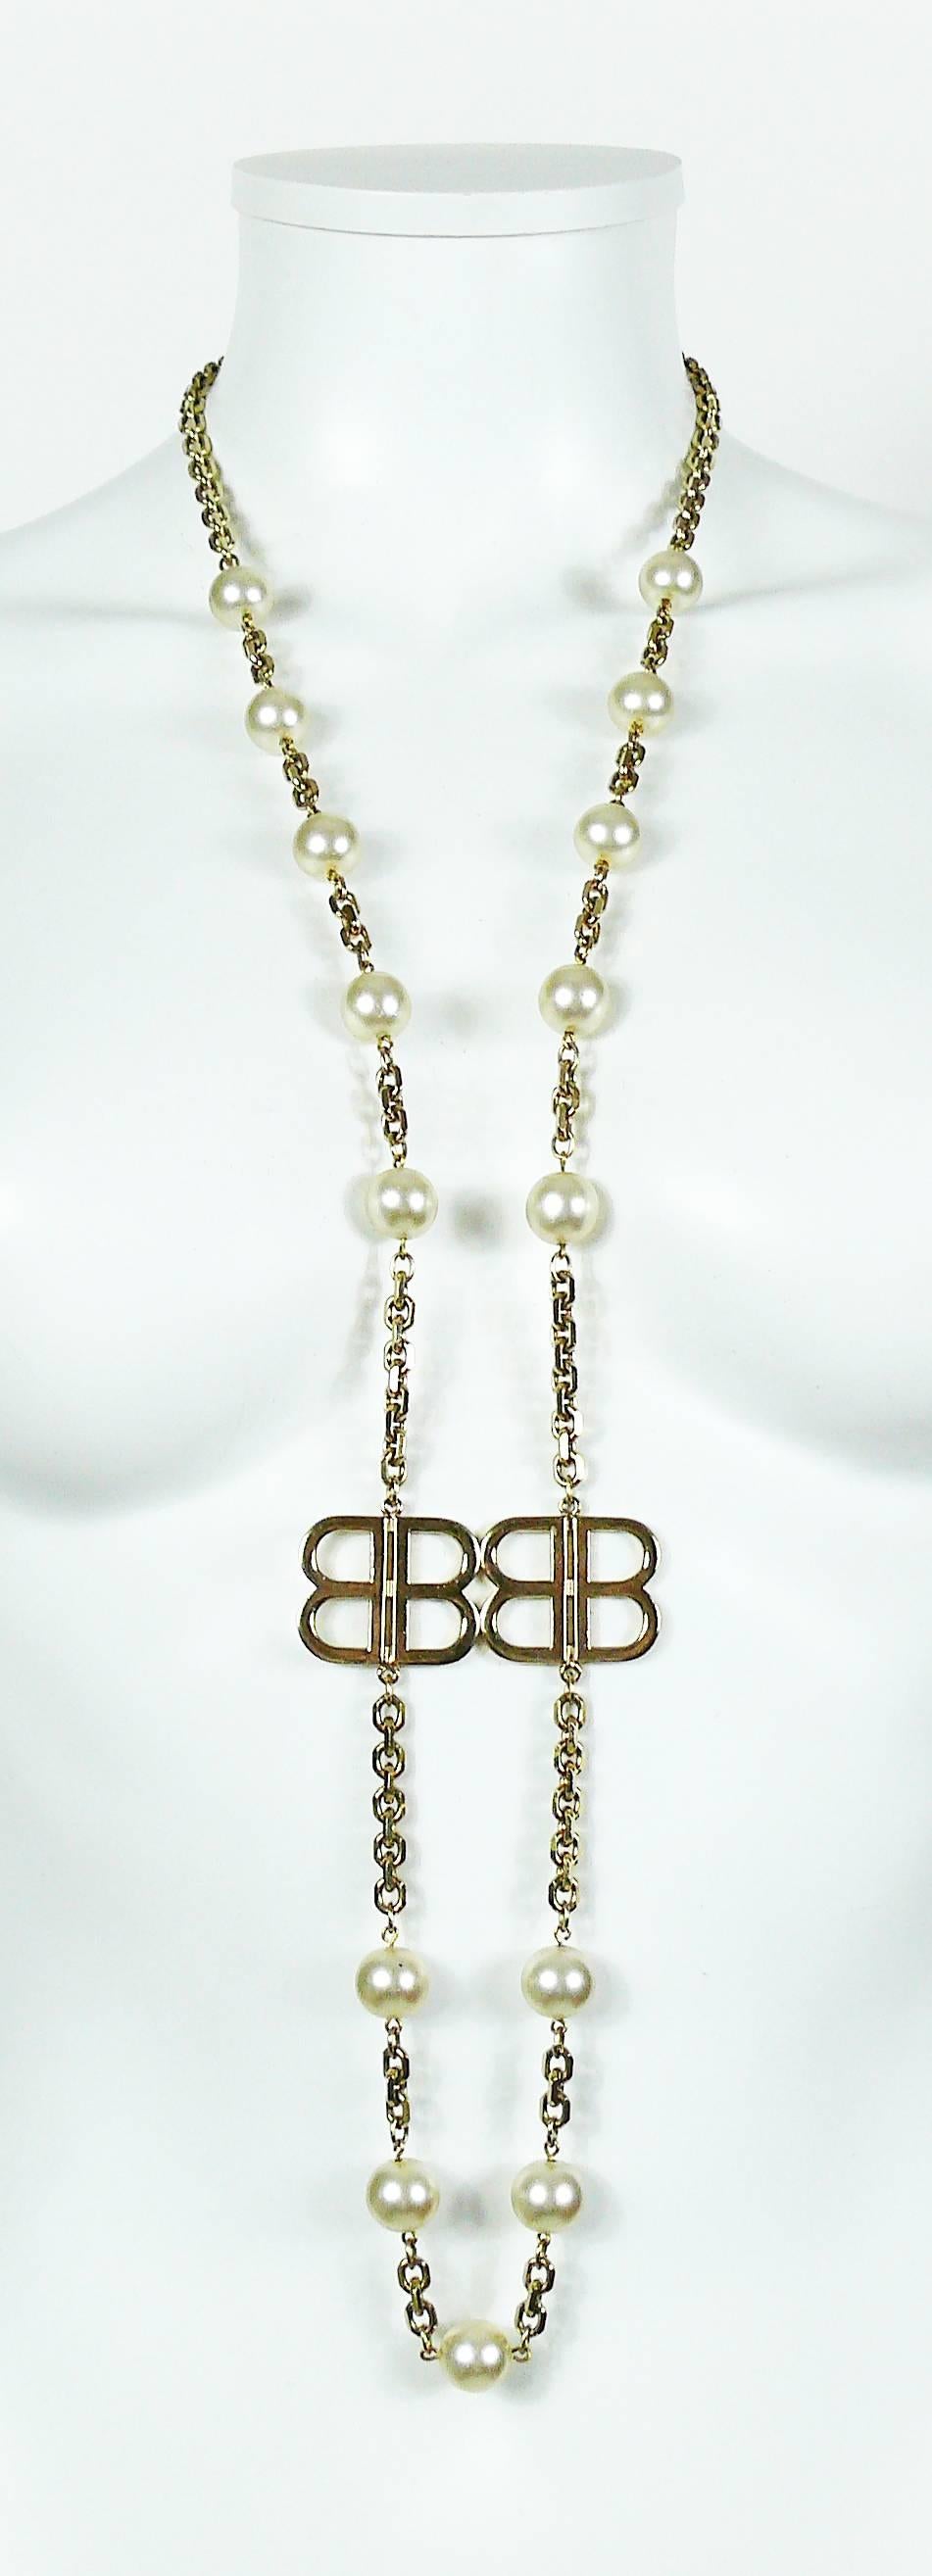 BALENCIAGA vintage sautoir necklace featuring a heavy gold toned chain, glass faux pearls and two large BB signature monogram logos.

Slips on.

Unmarked.

Indicative measurements : total length approx. 104 cm (40.94 inches) / logo 3.3 cm x 2.7 cm